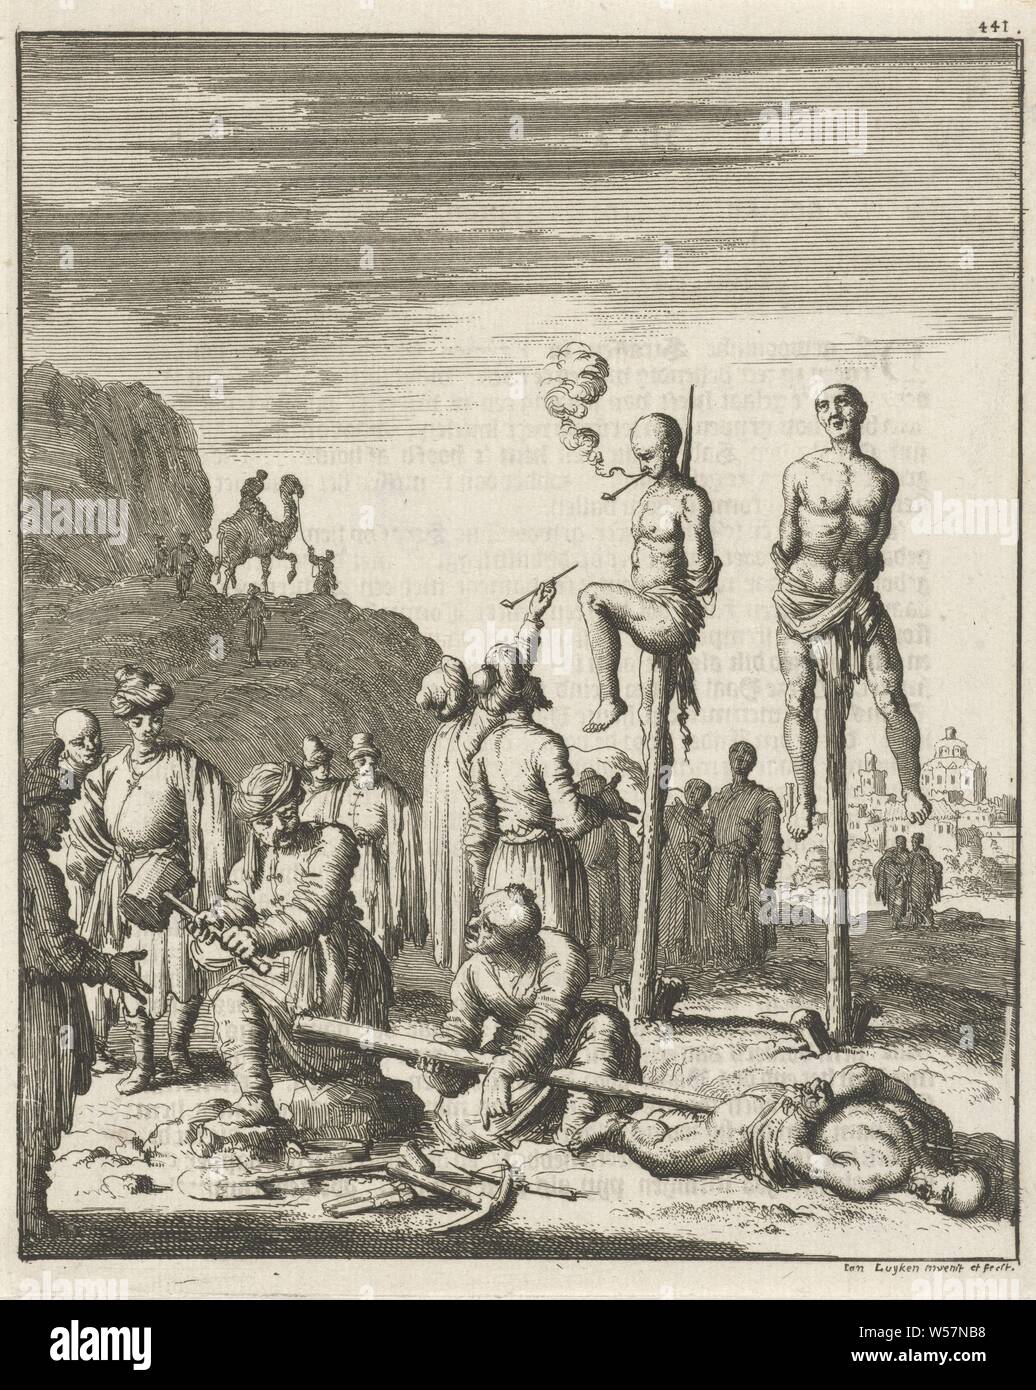 Figures for punishment impaled on a pole in Egypt, Print numbered top right: 441, instruments of torture, execution or punishment, Egypt, Jan Luyken (mentioned on object), Amsterdam, 1681, paper, etching, h 137 mm × w 172 mm Stock Photo